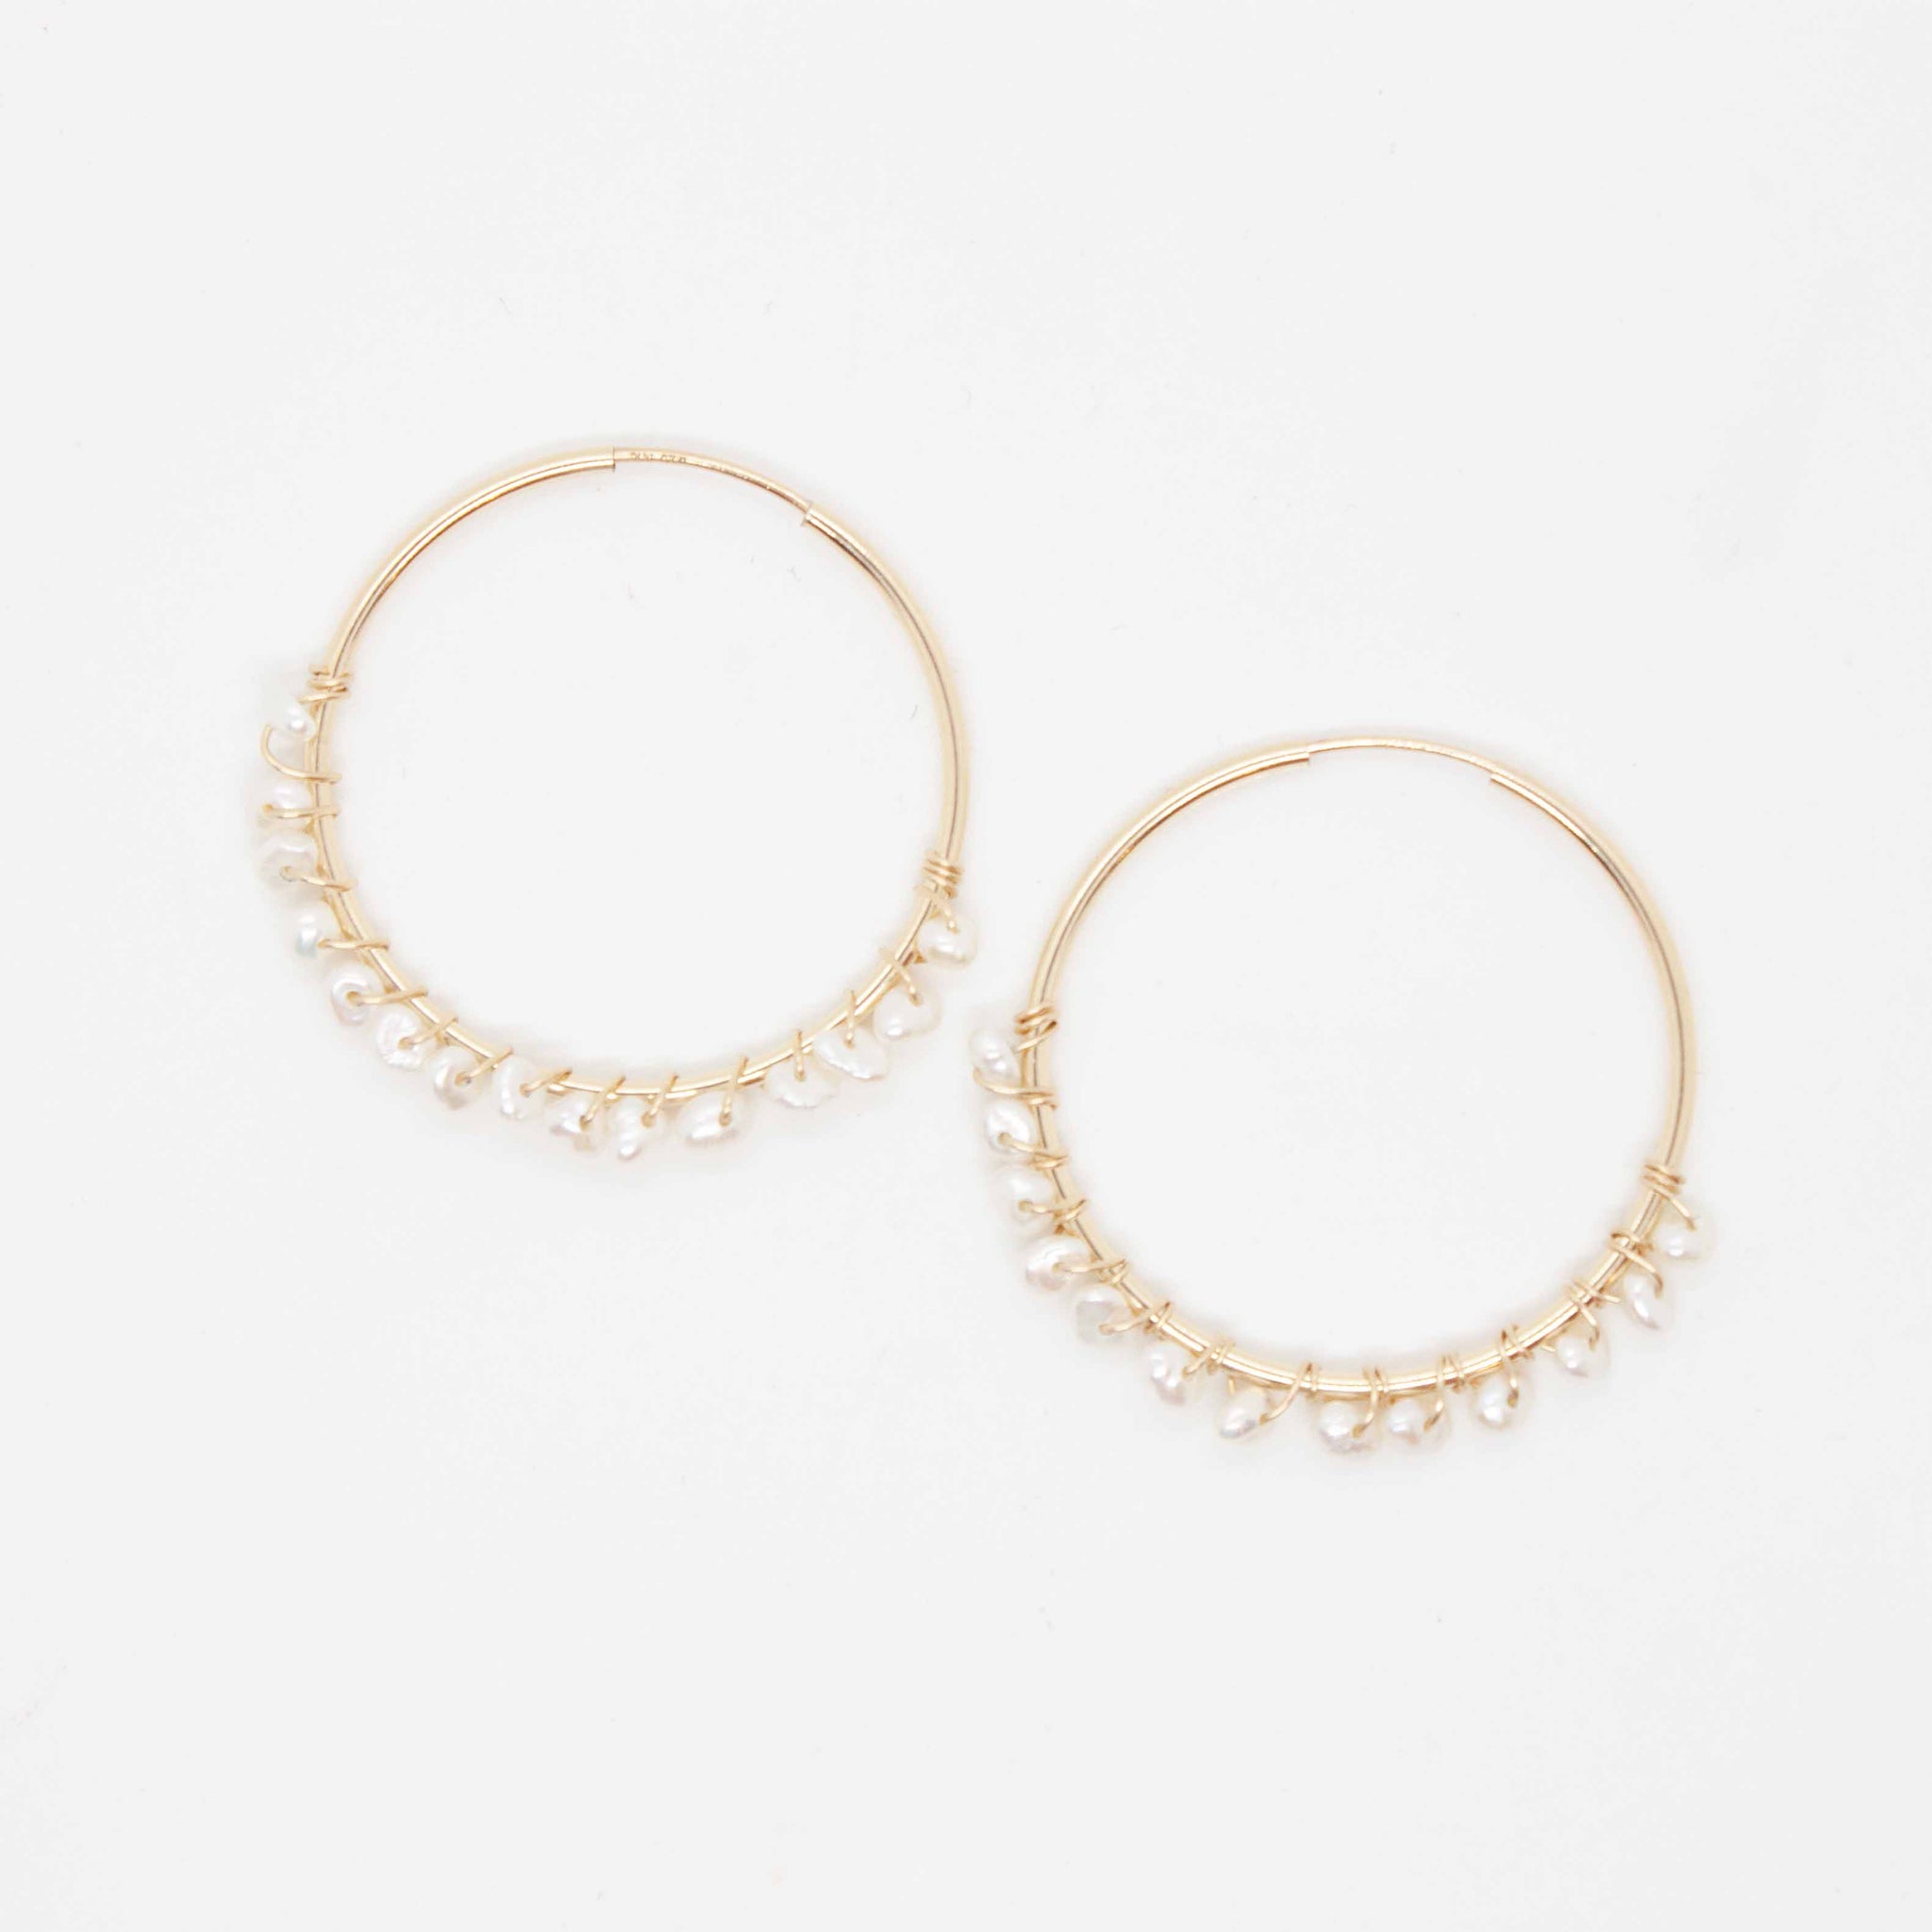 30mm gold filled sleeper hoops, with white pearls wrapped with gold wire.